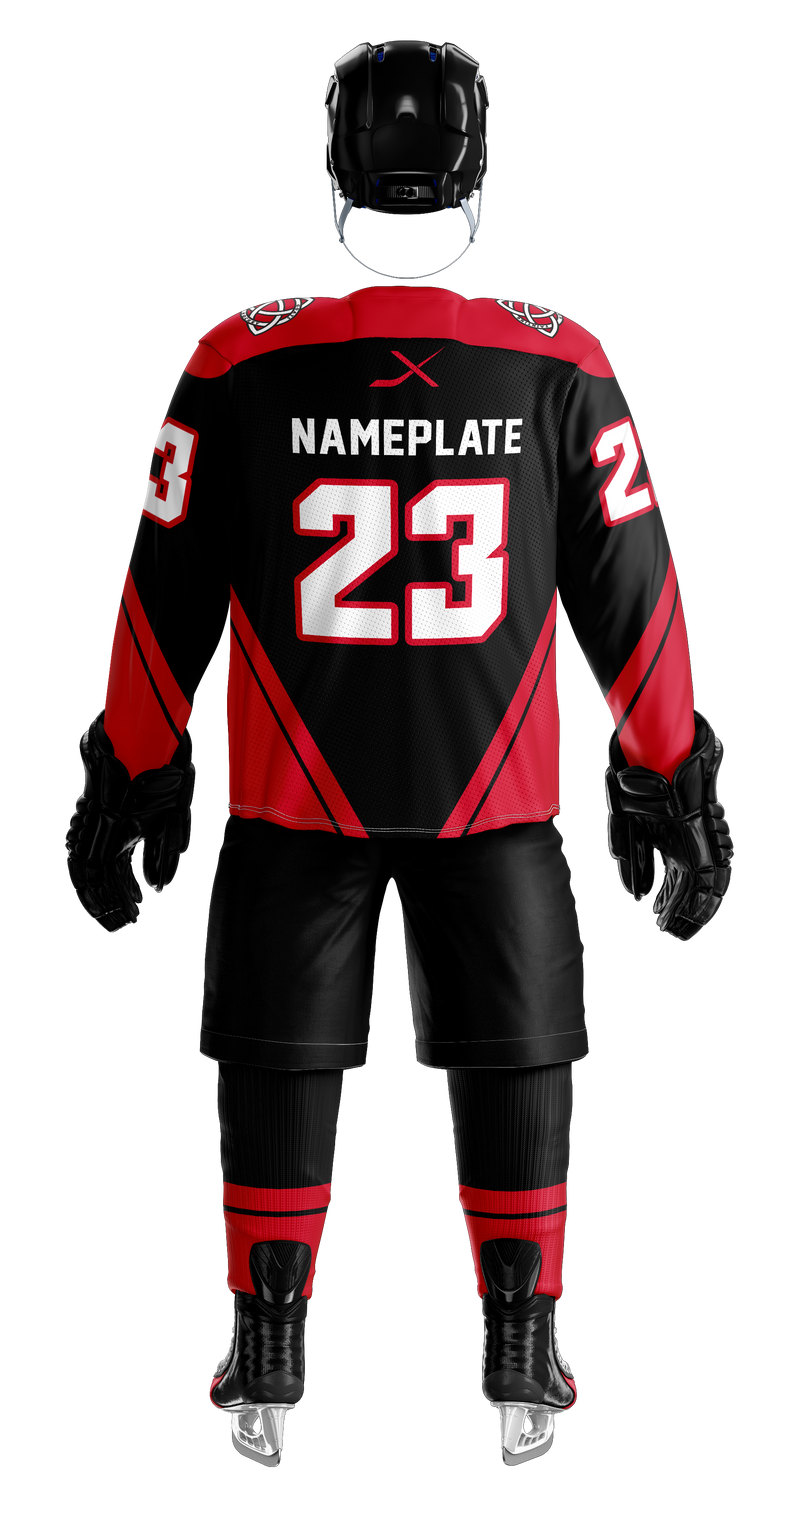 2L FAINTING GOATS GAME JERSEY - BLACK